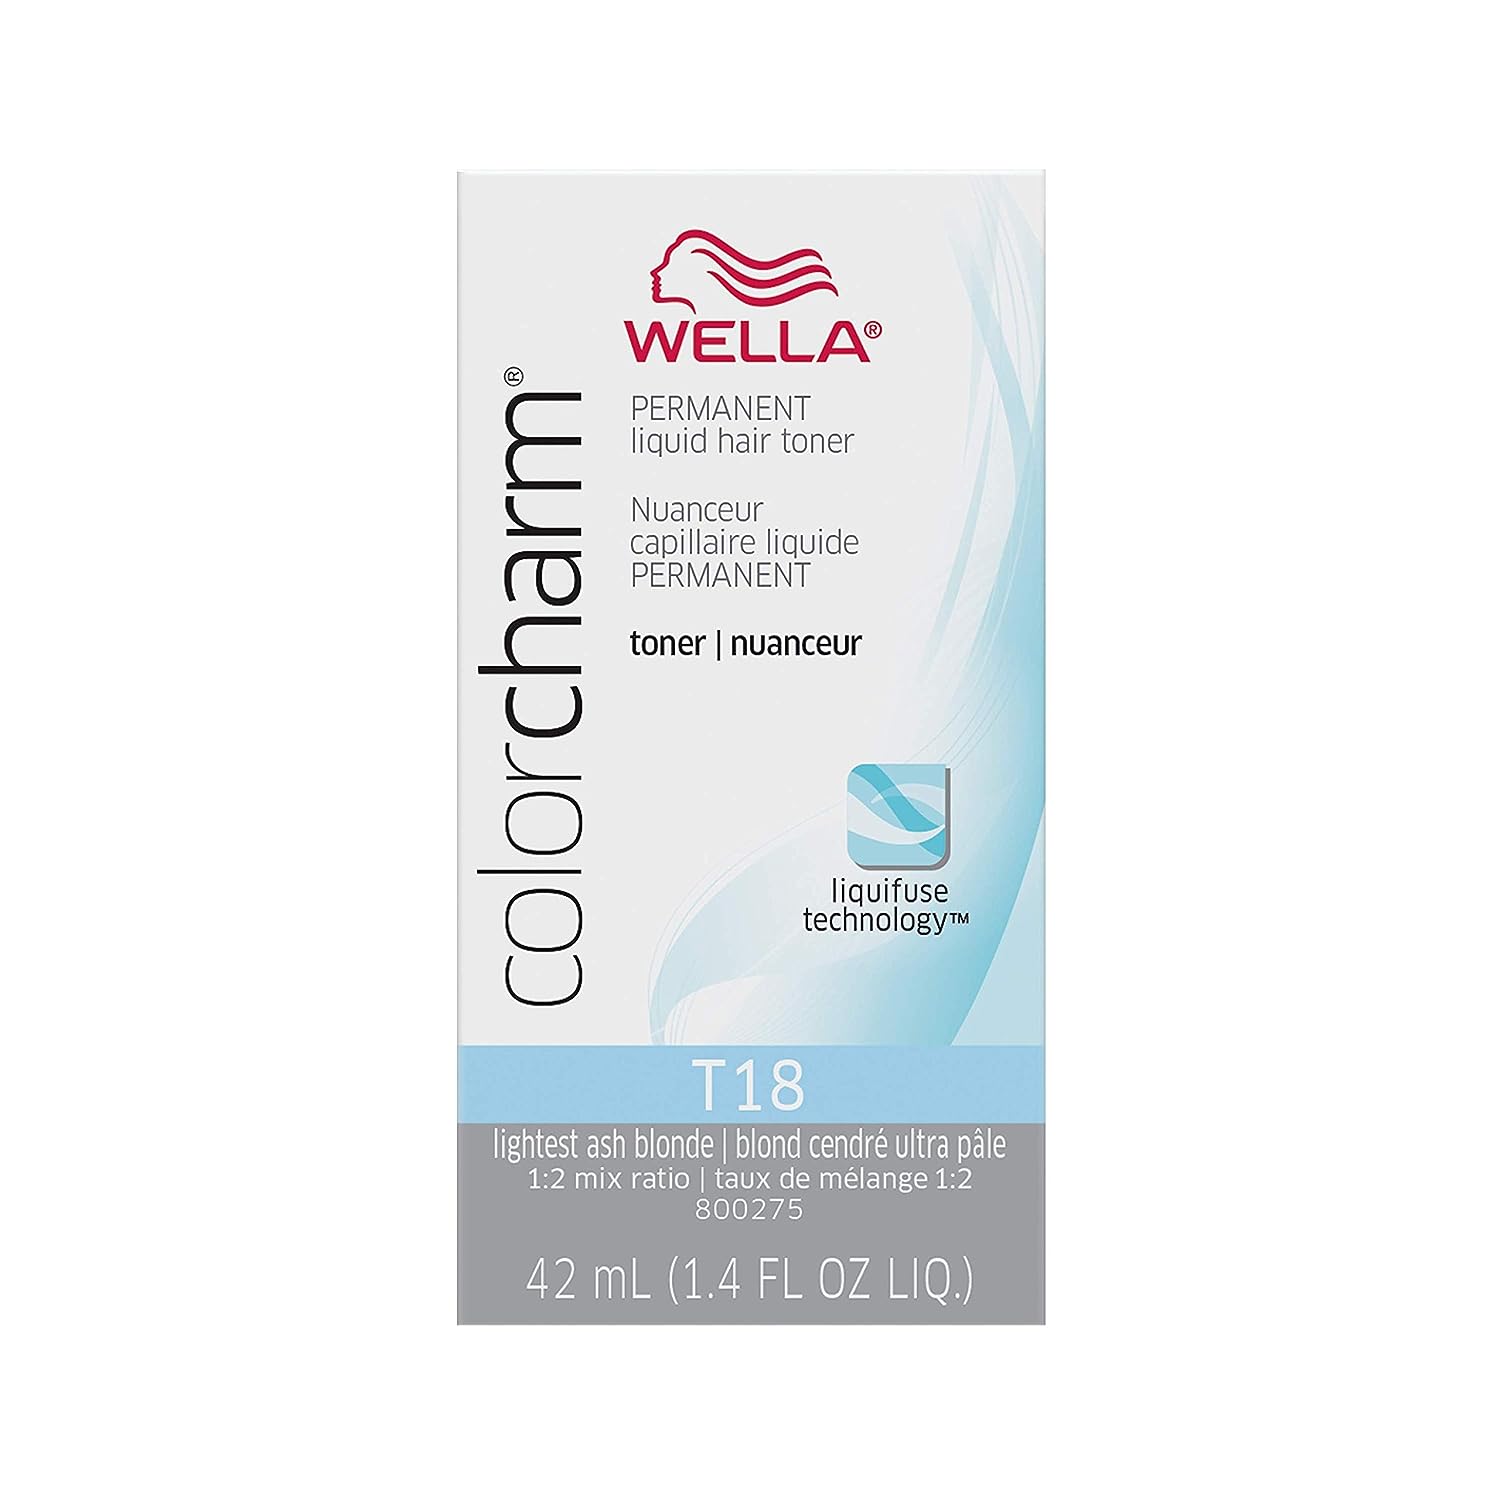 Wella ColorCharm Permanent Liquid Hair Toner, Neutralize Brass With Liquifuse Technology